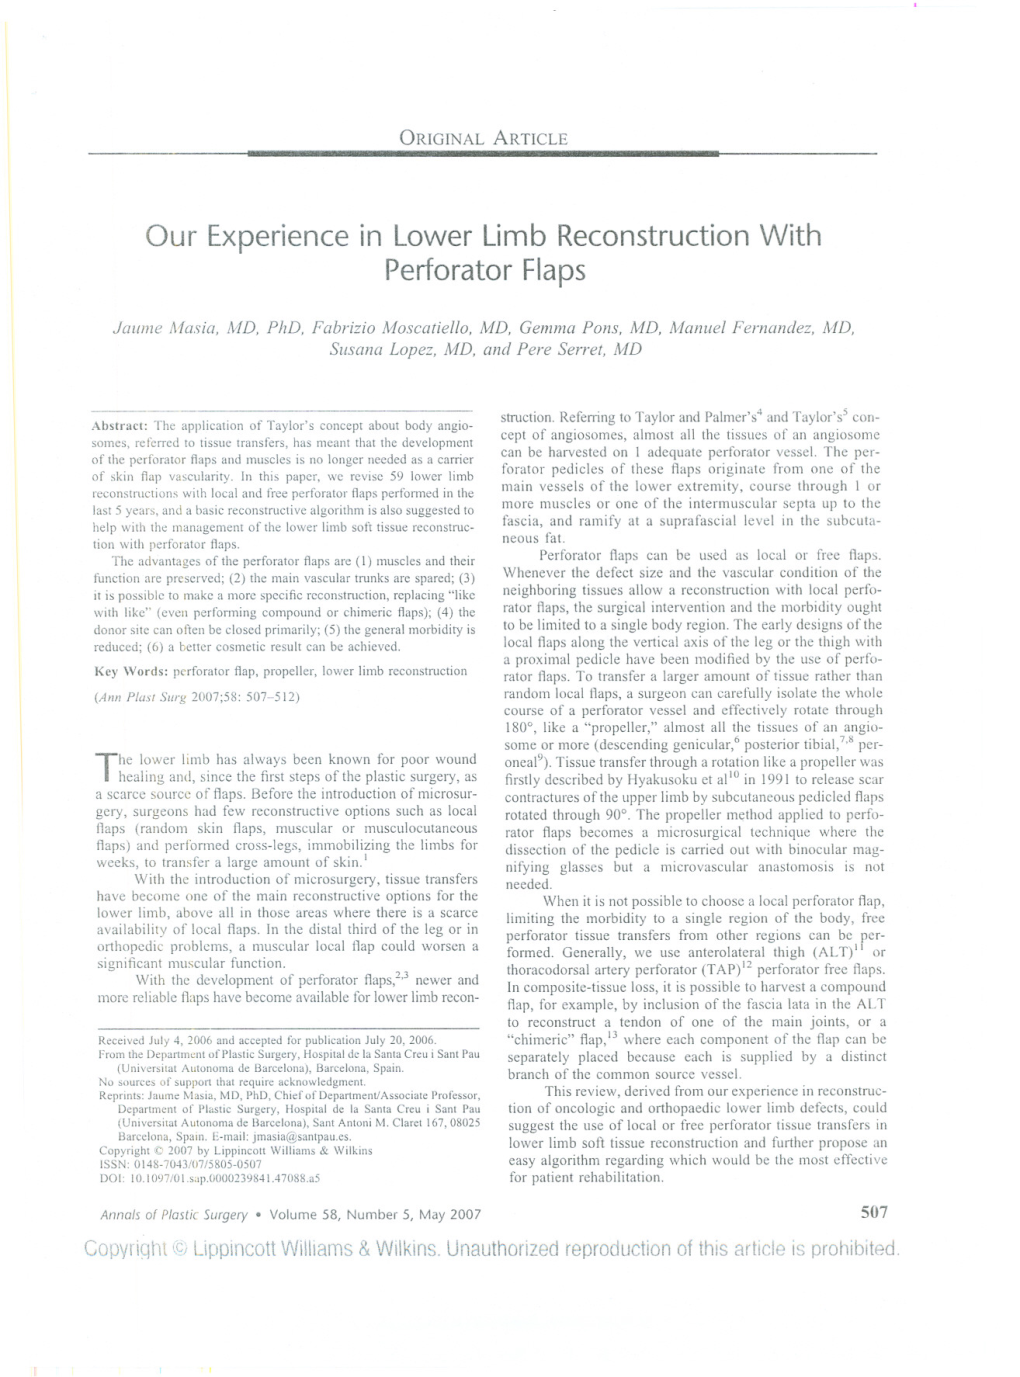 Our Experience in Lower Limb Reconstruction with Perforator Flaps